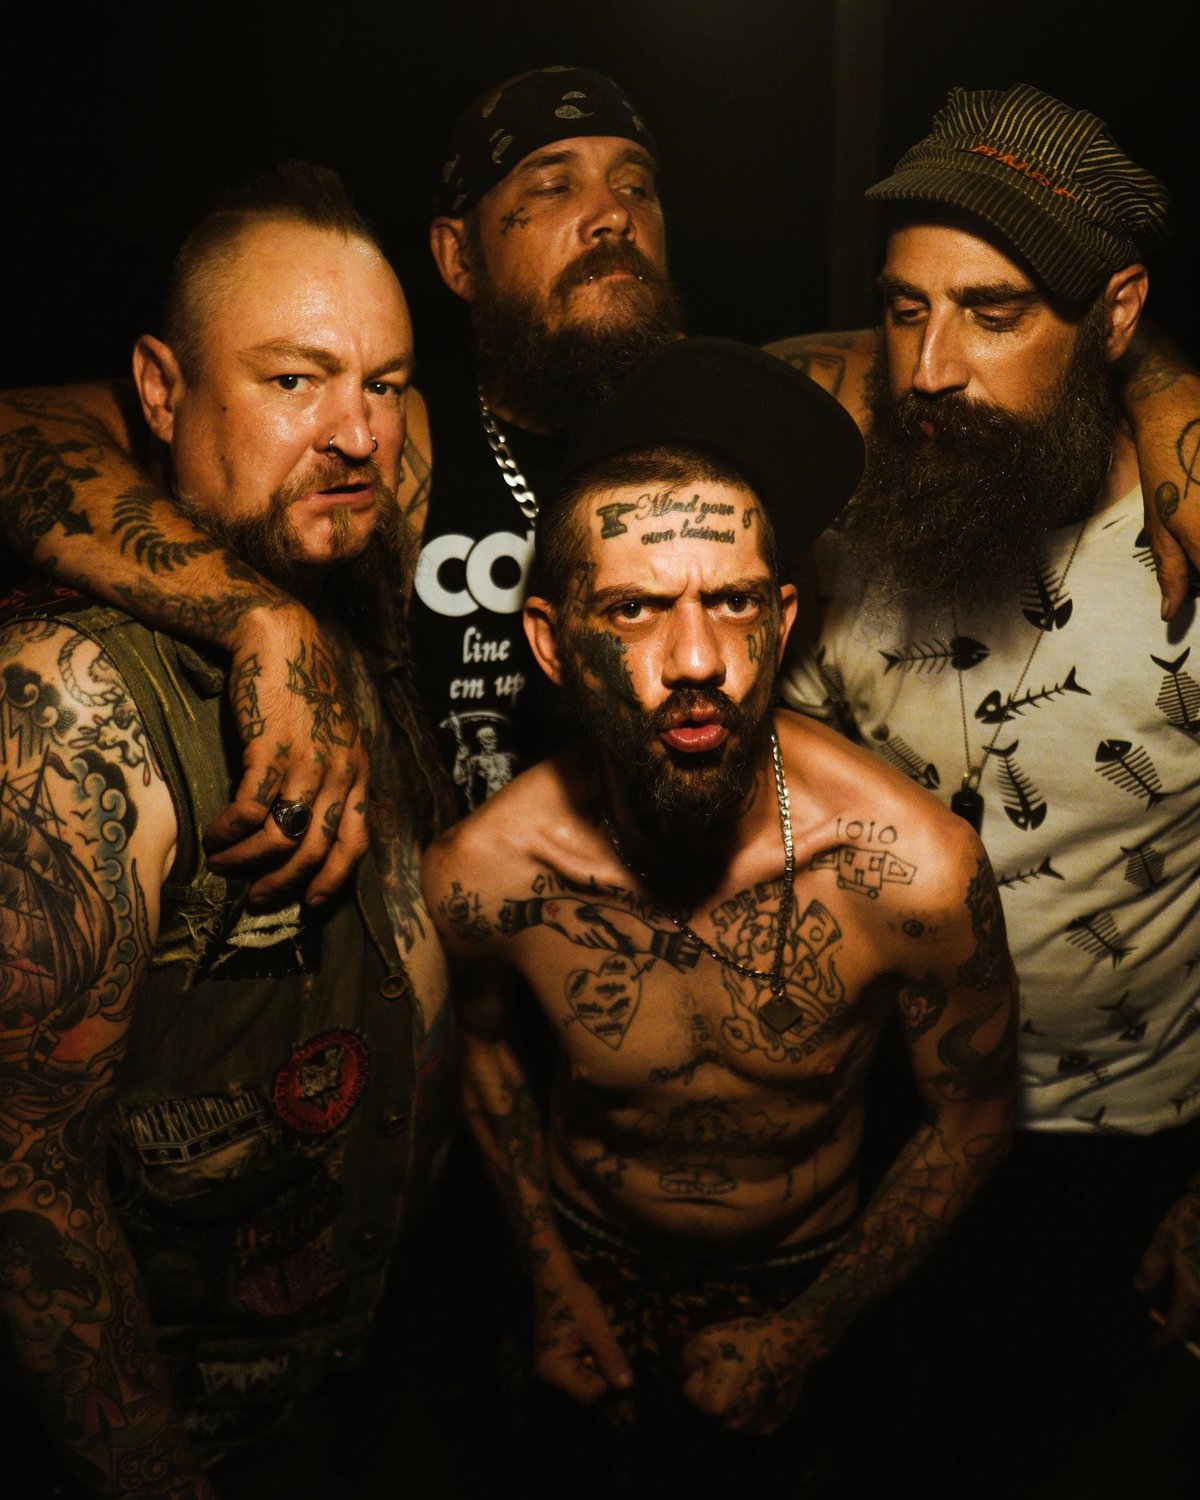 Lansing’s The Goddamn Gallows will play its old stomping ground, Mac’s Bar, Friday (March 17) before hitting the road with Hank Williams IV.